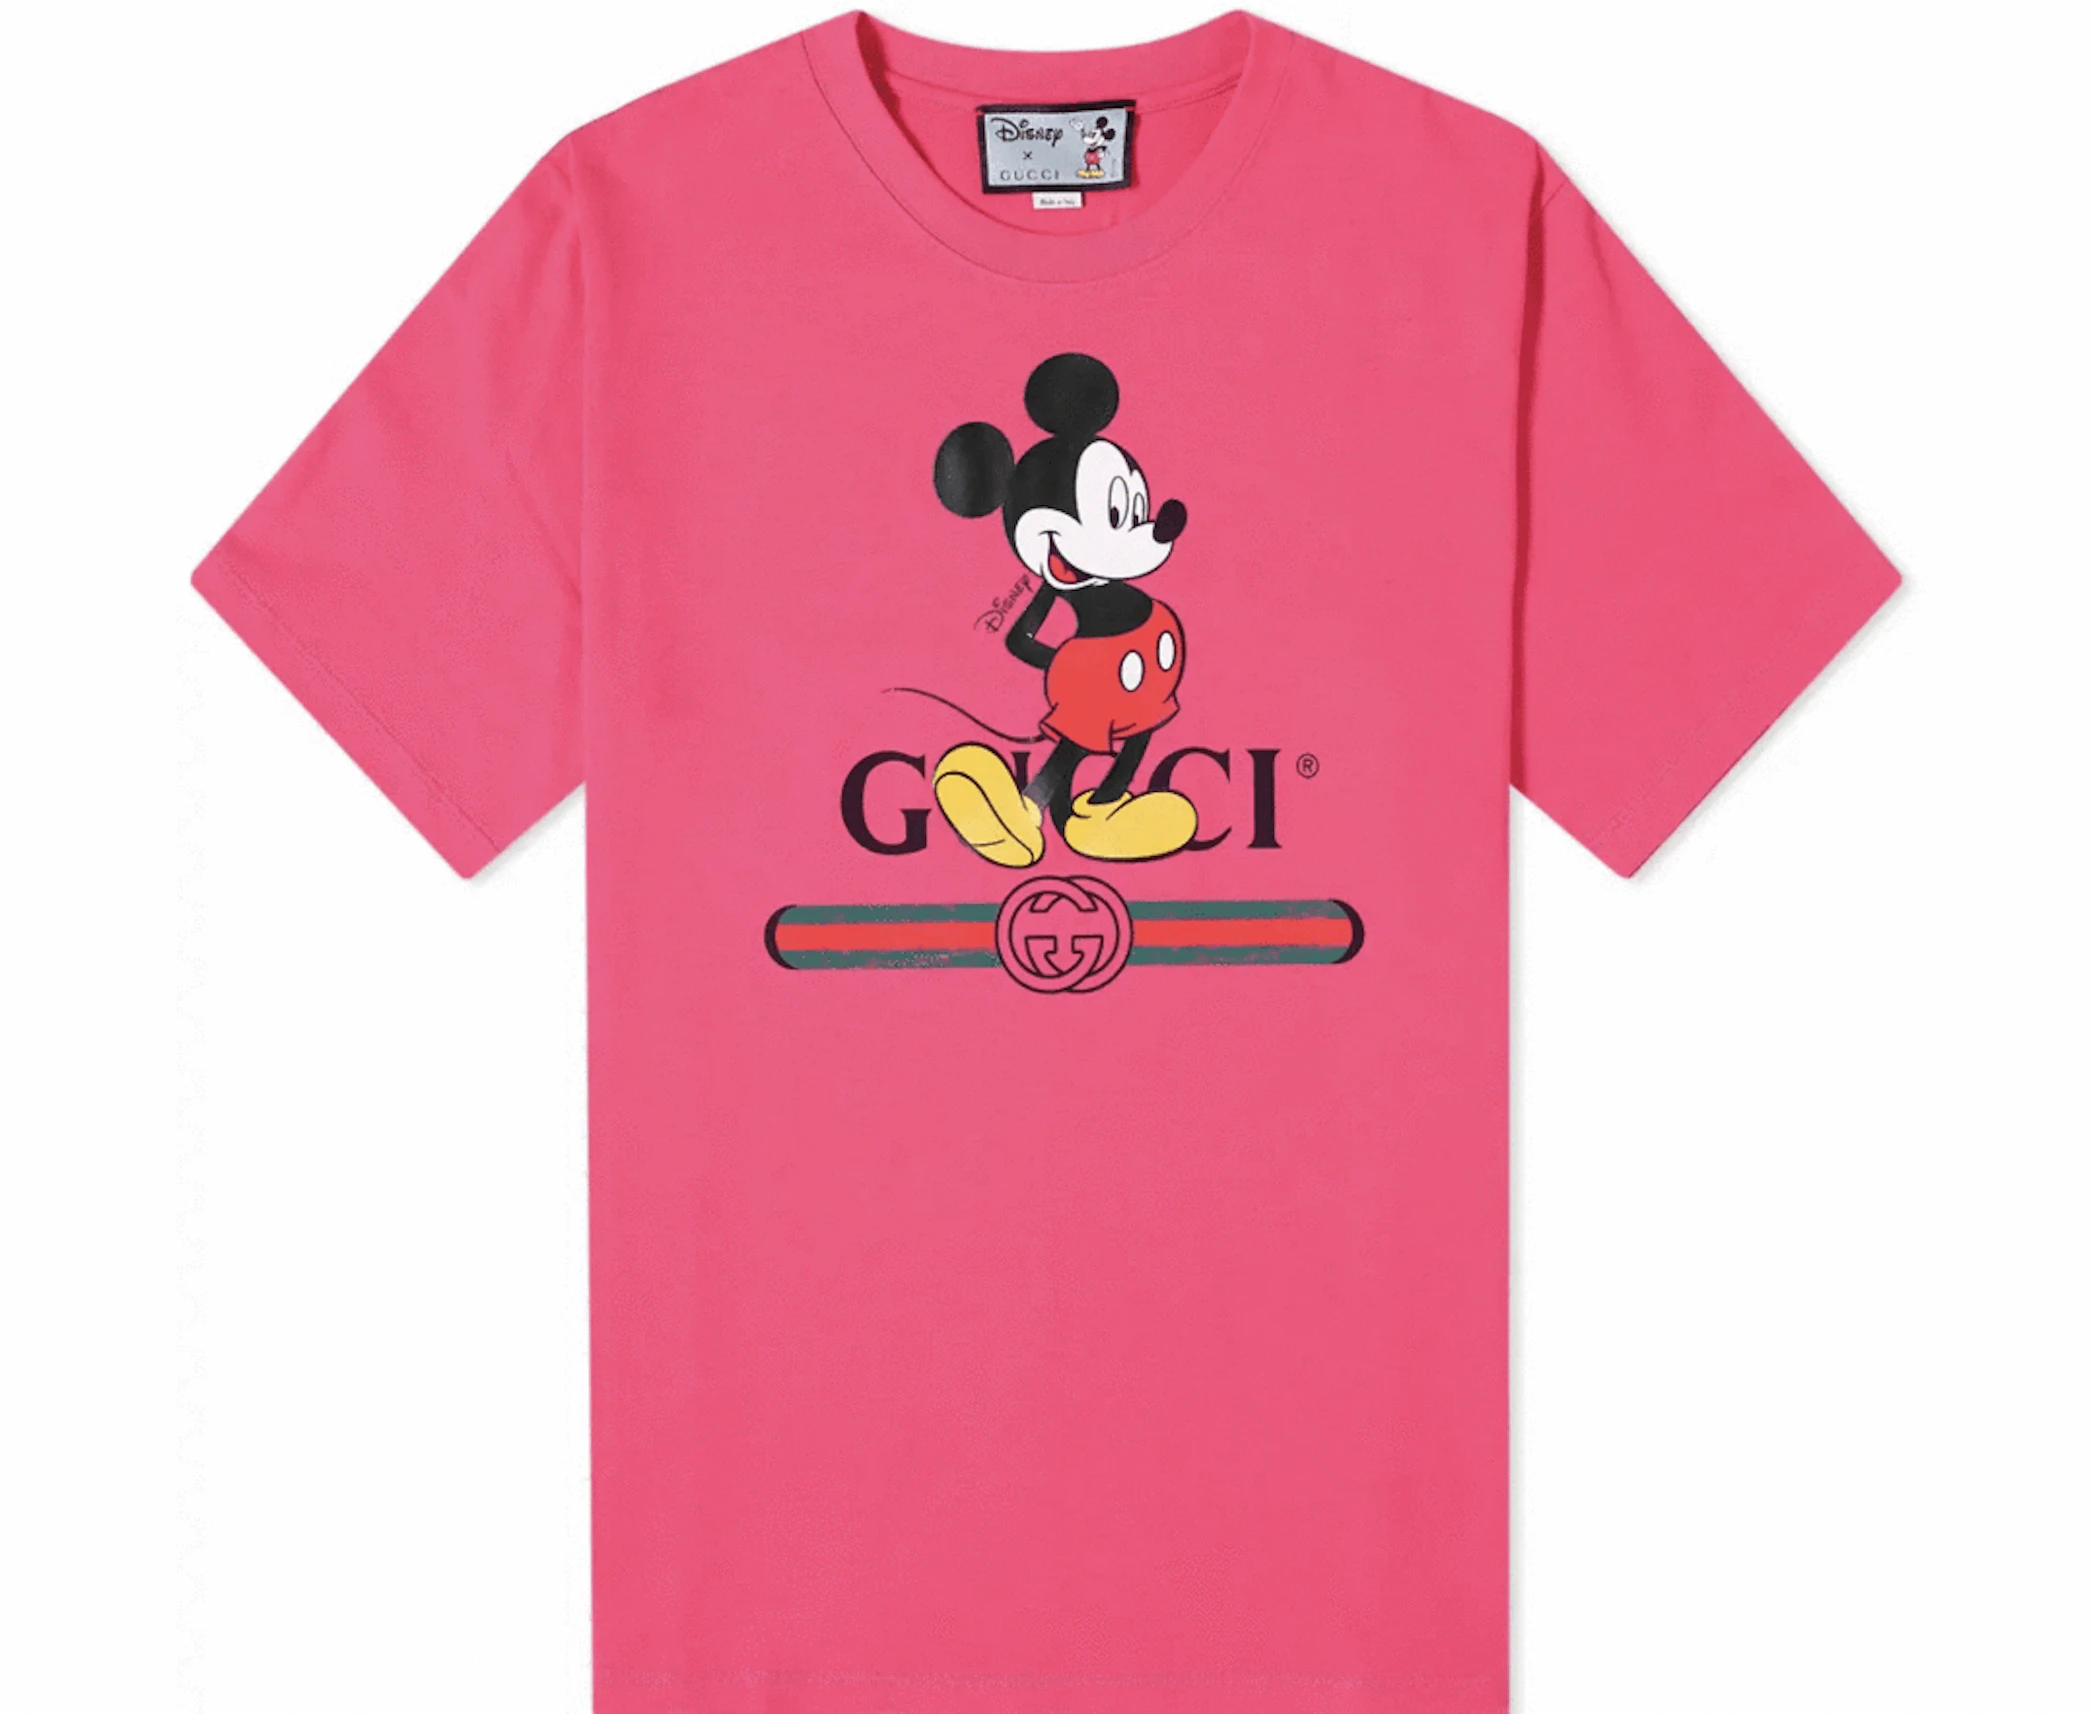 Gucci x Disney Mickey Mouse T-shirt Pink - US